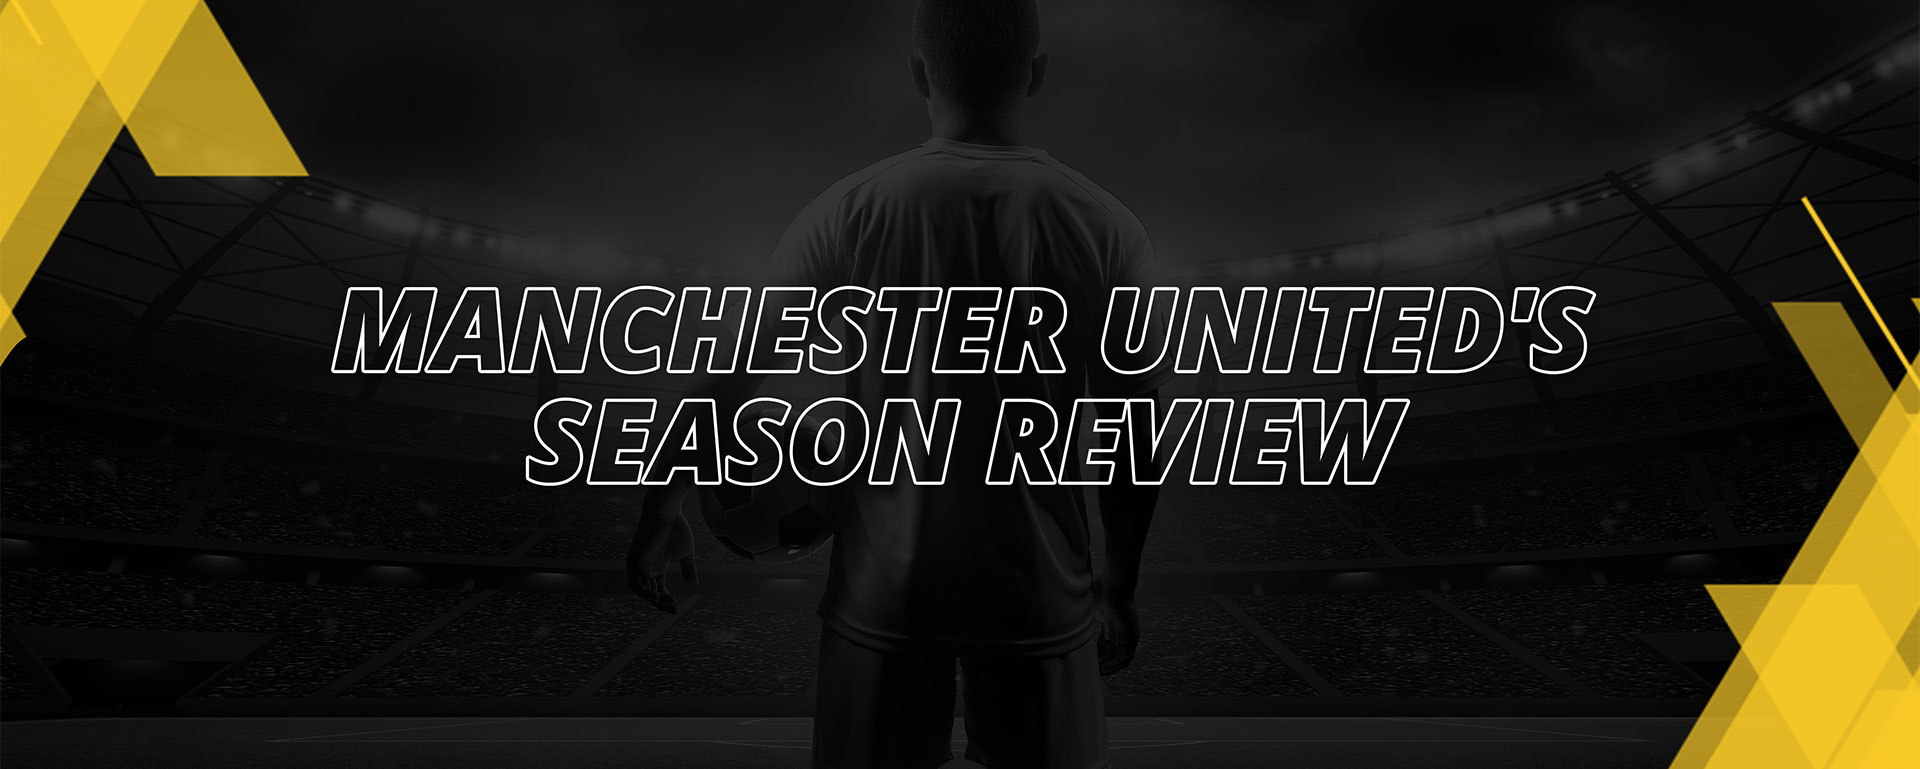 MANCHESTER UNITED’S SEASON REVIEW